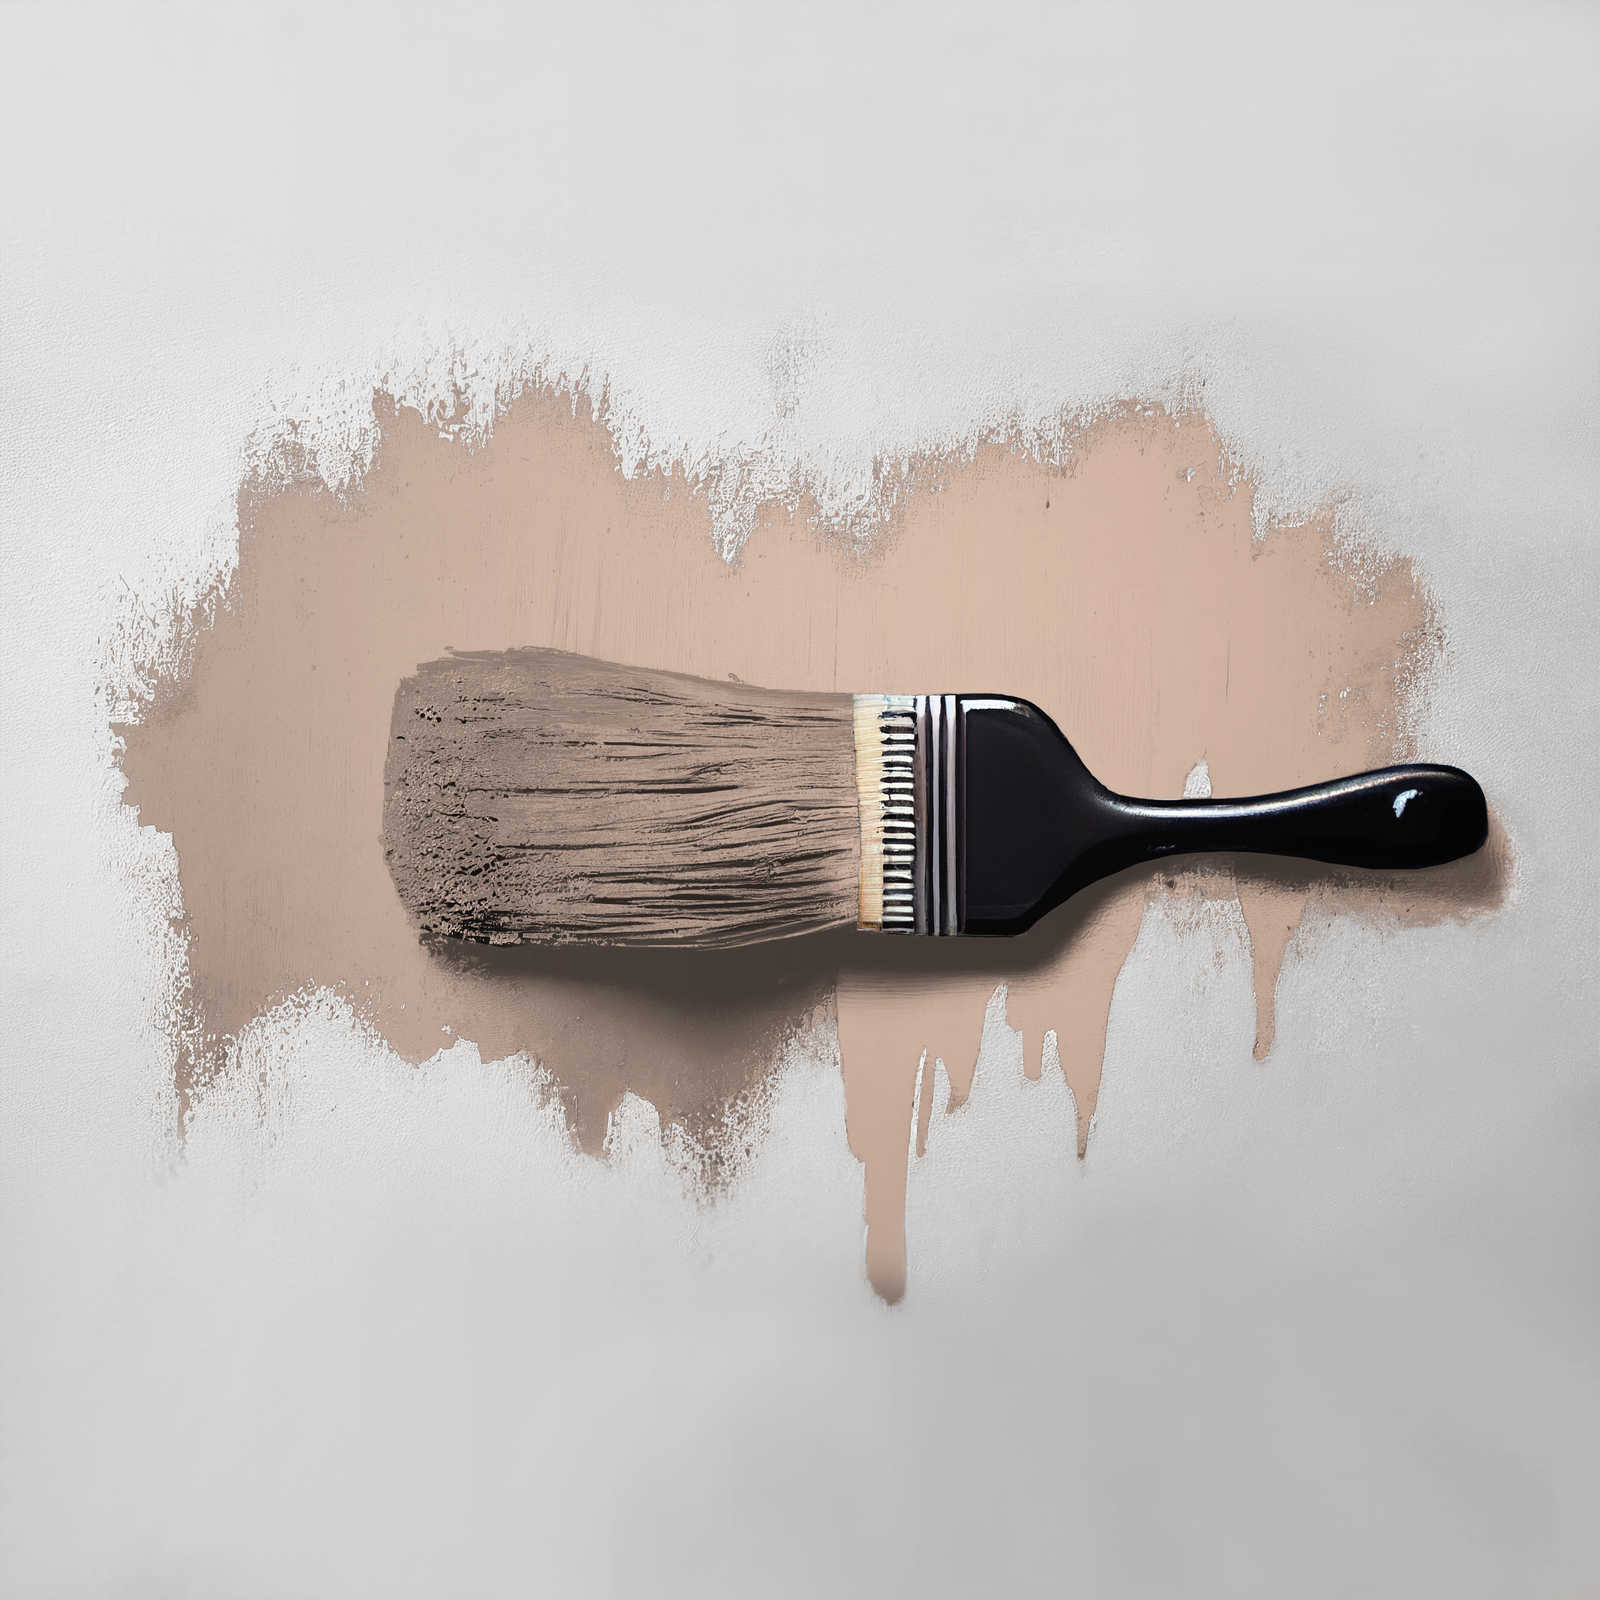             Wall Paint TCK7001 »Icy Chocolate« in delicate red-brown – 2.5 litre
        